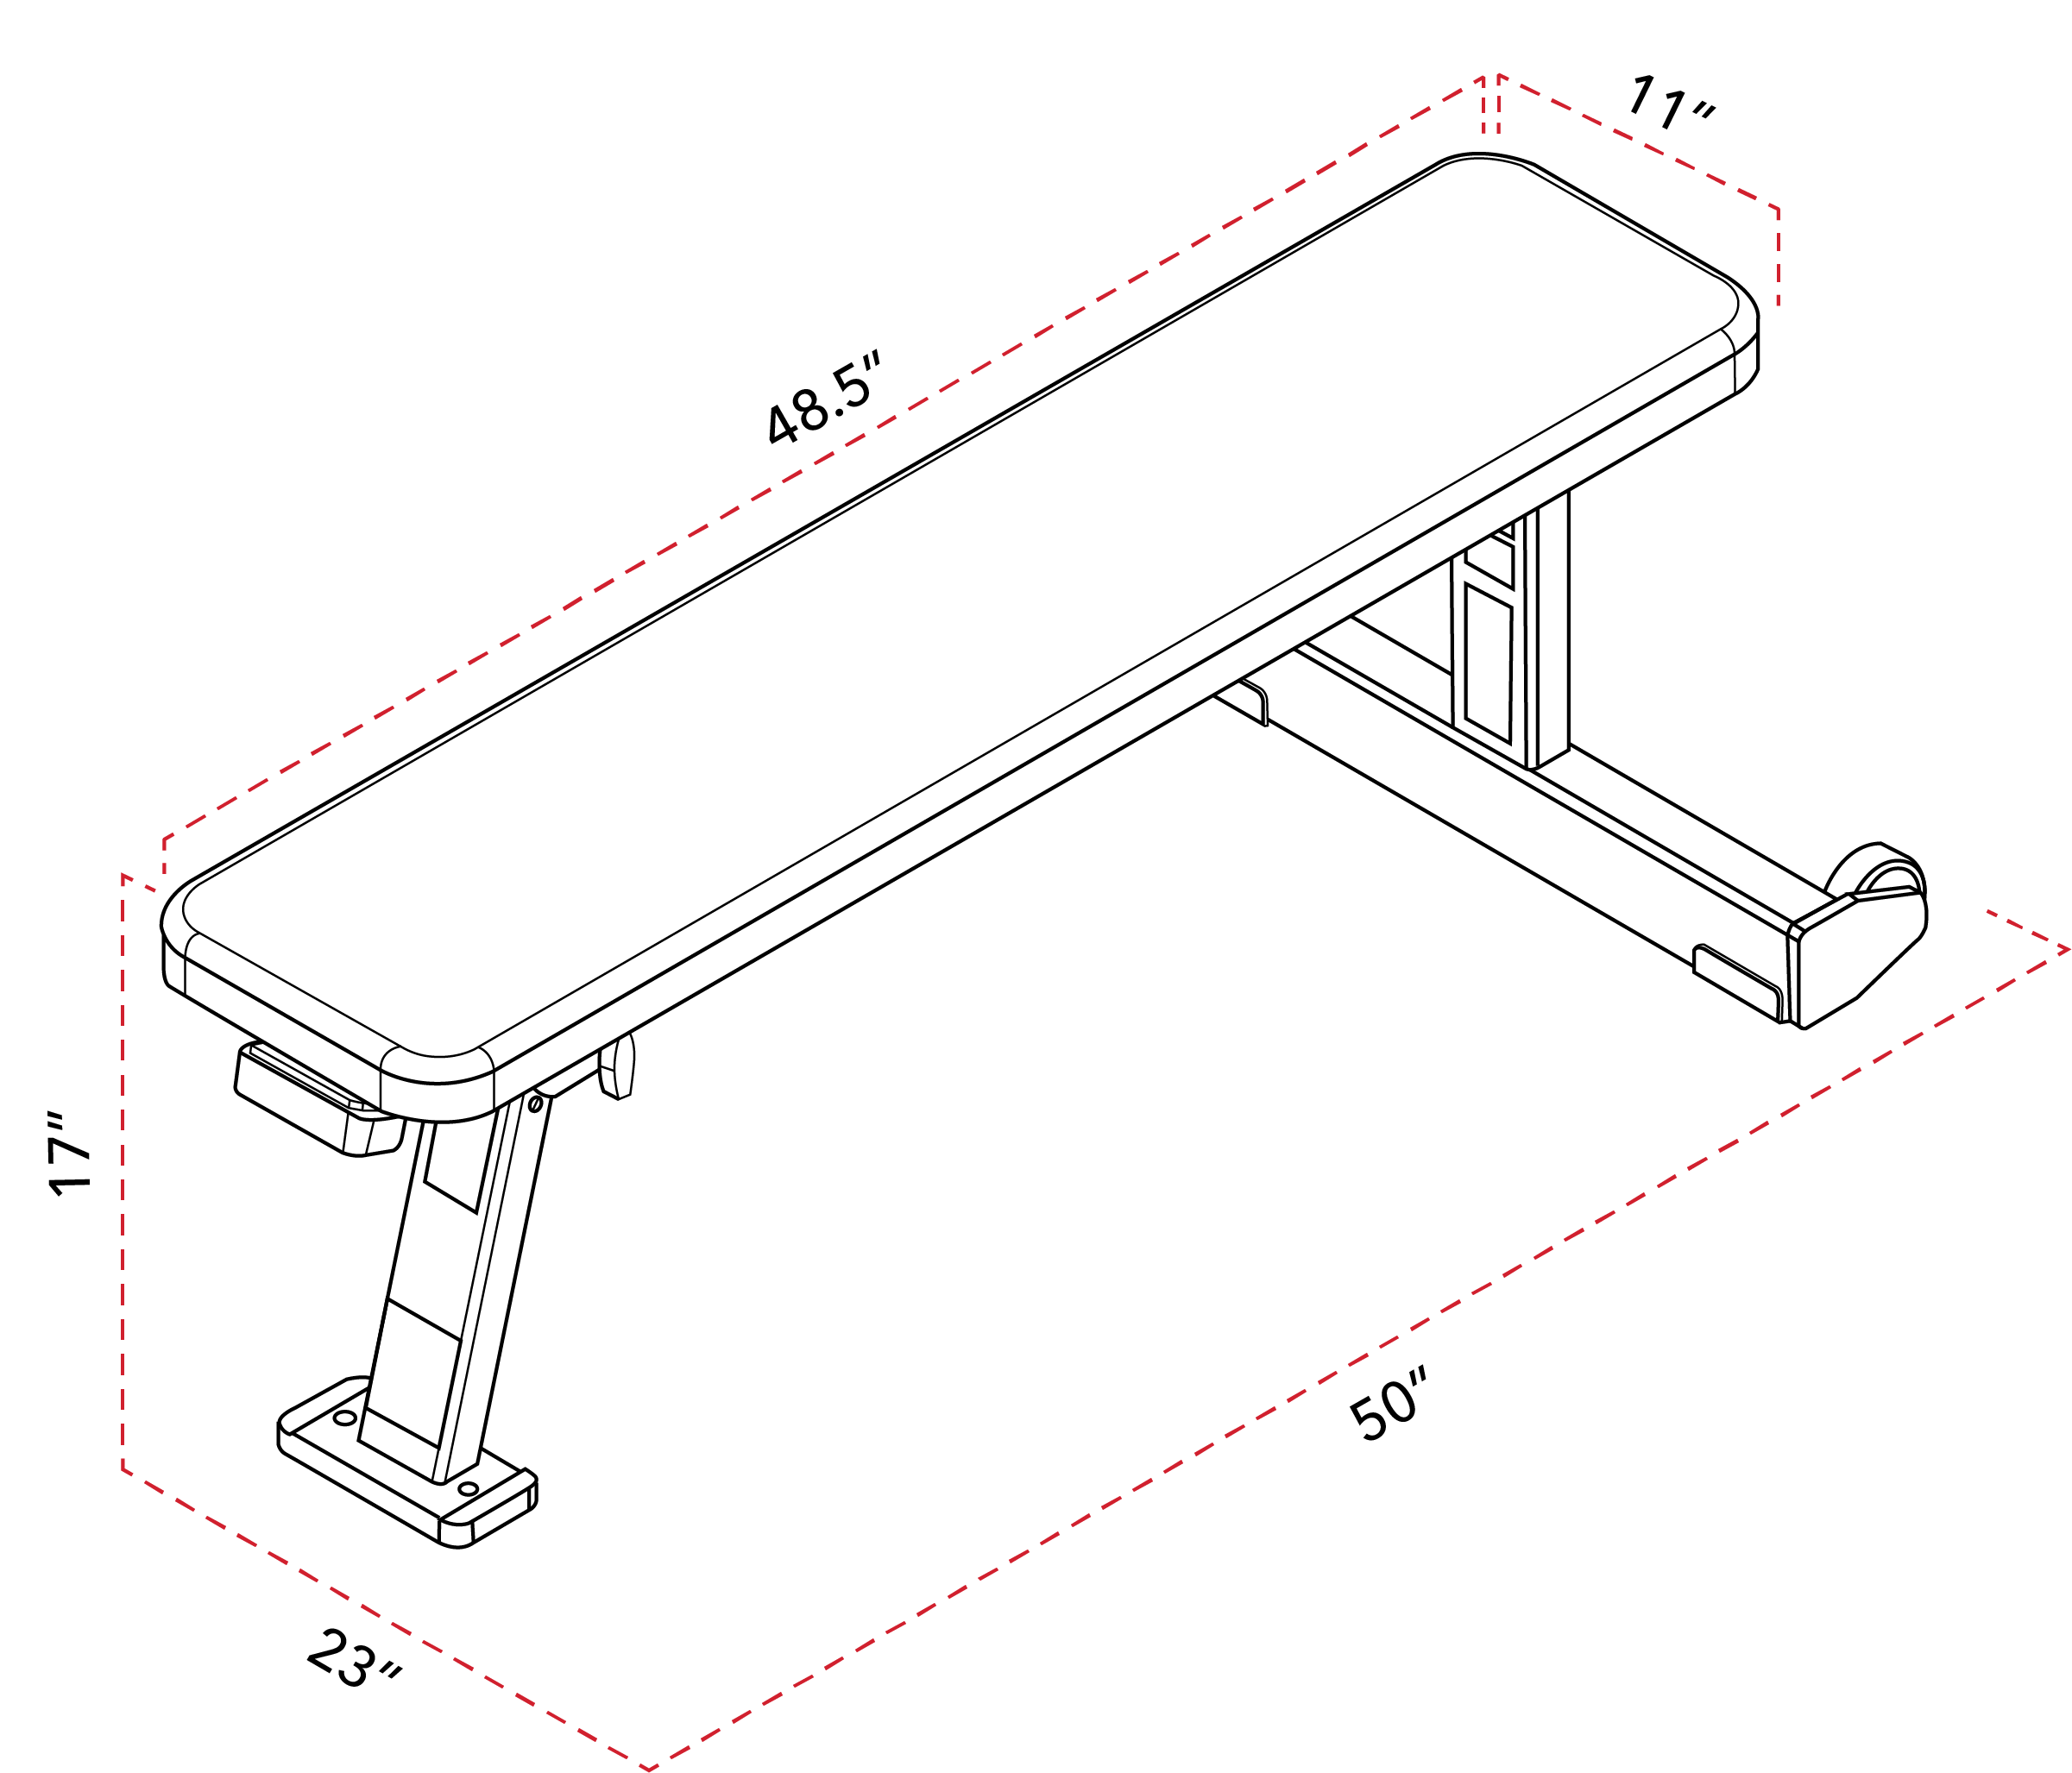 Angled Flat Bench Diagram of Dimensions